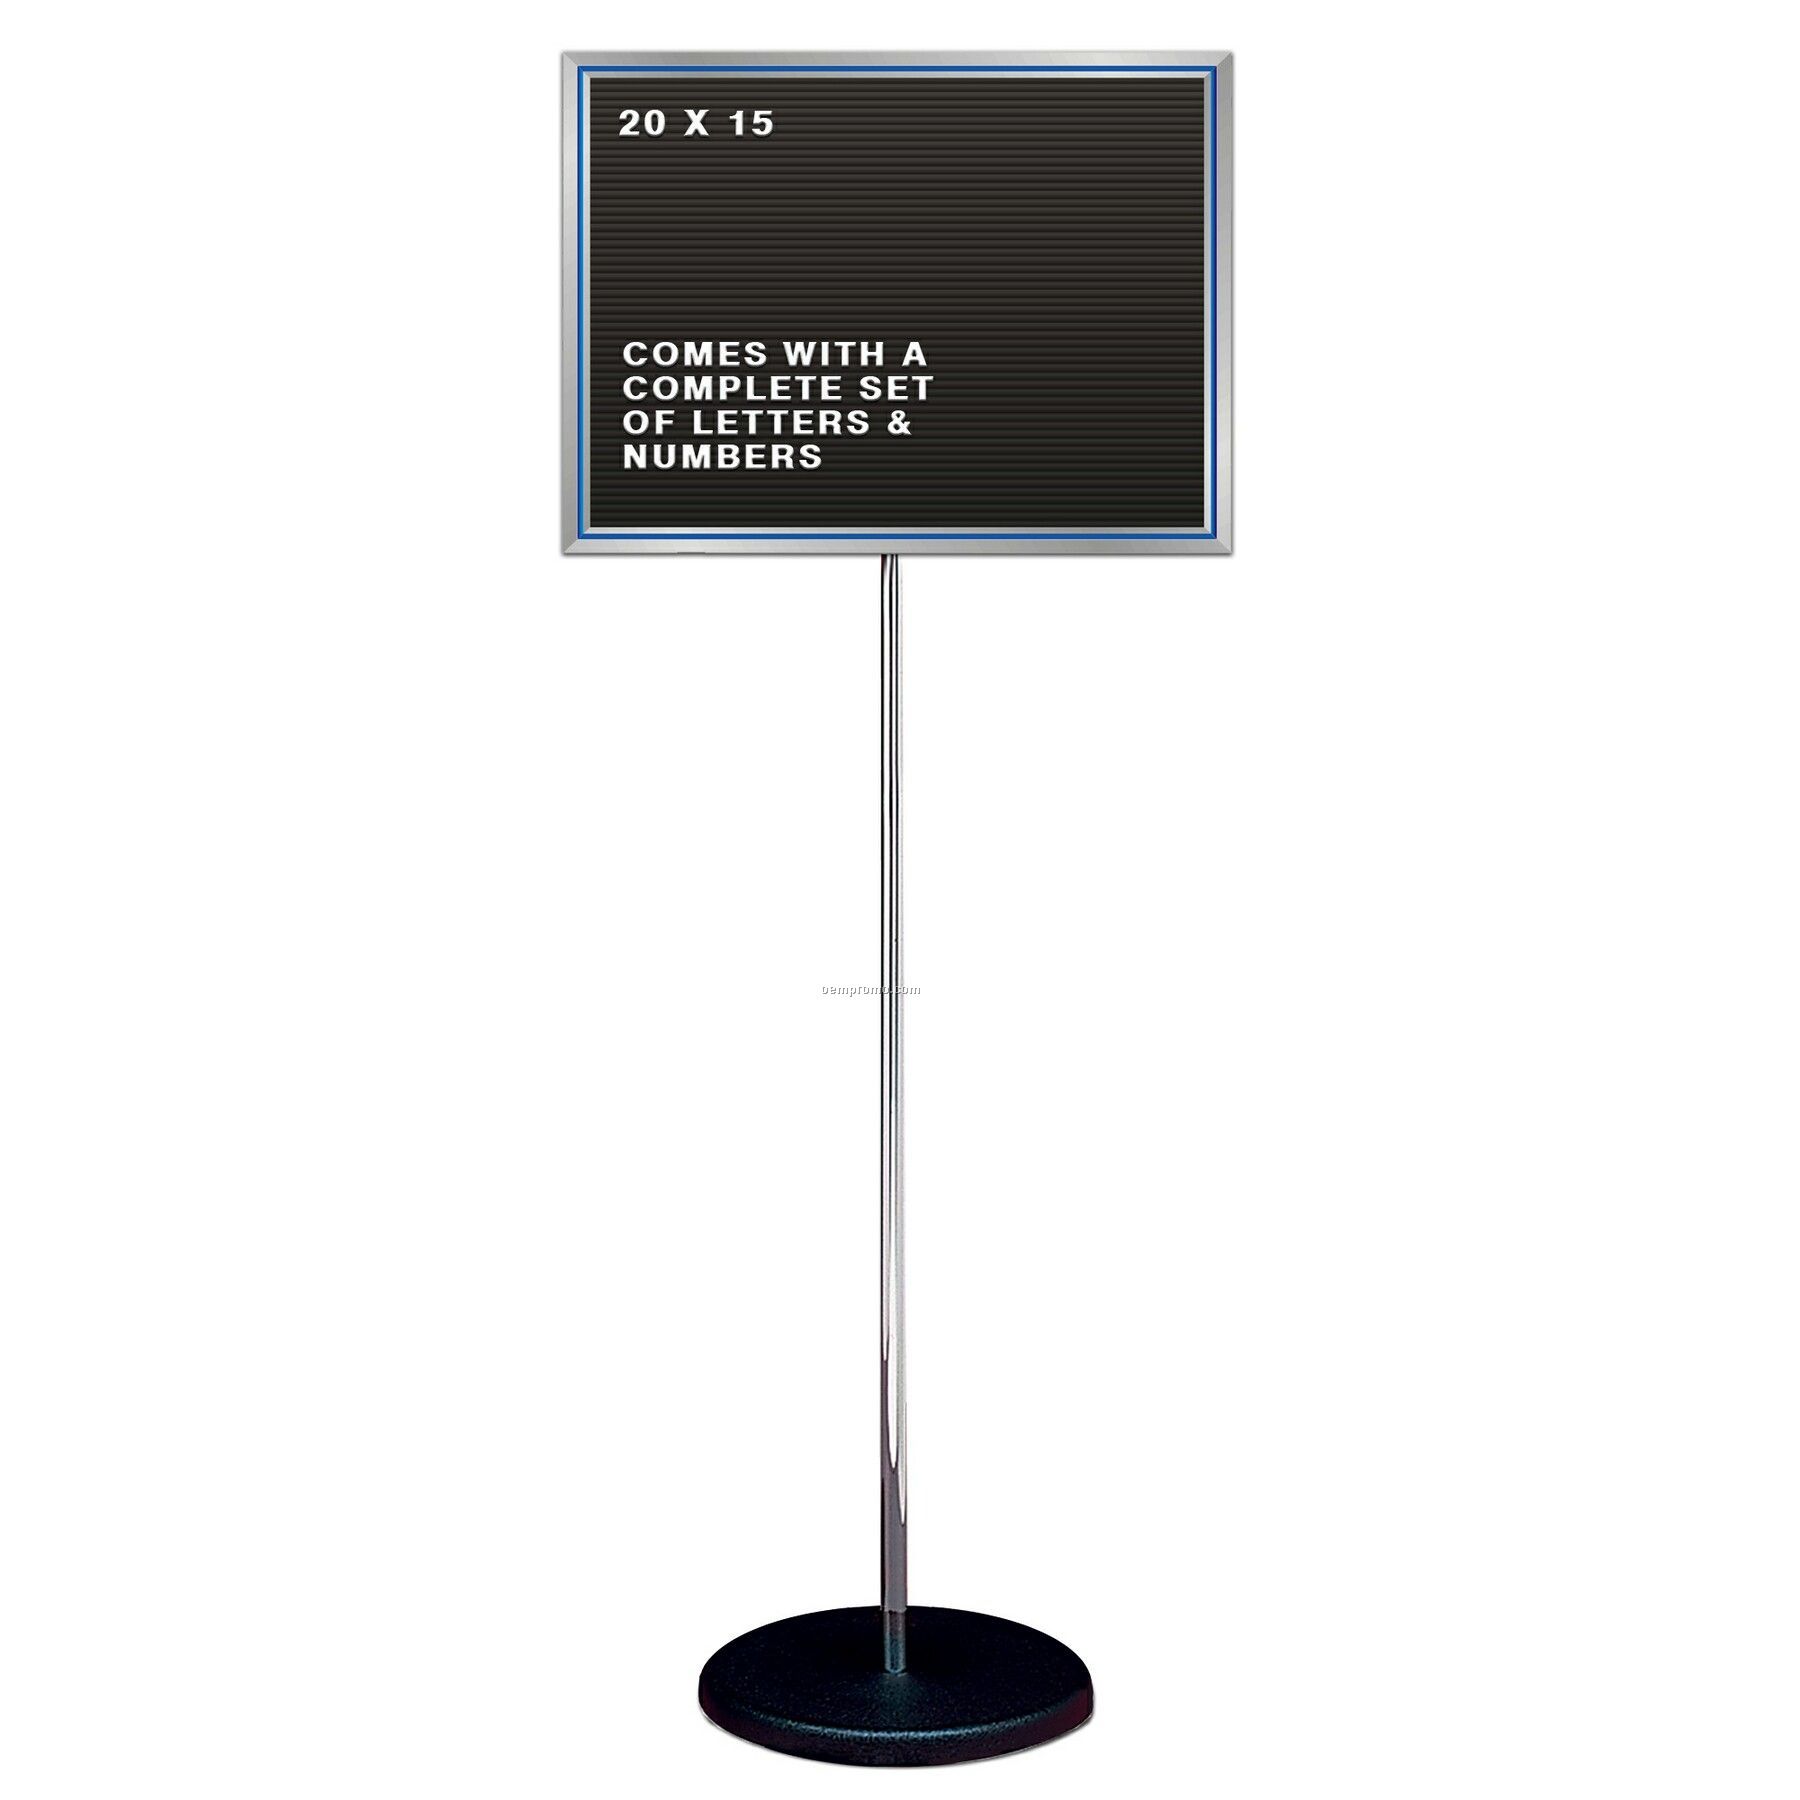 Free Standing Changeable Letter Board W/ Chrome Pole Stand (20"X15")